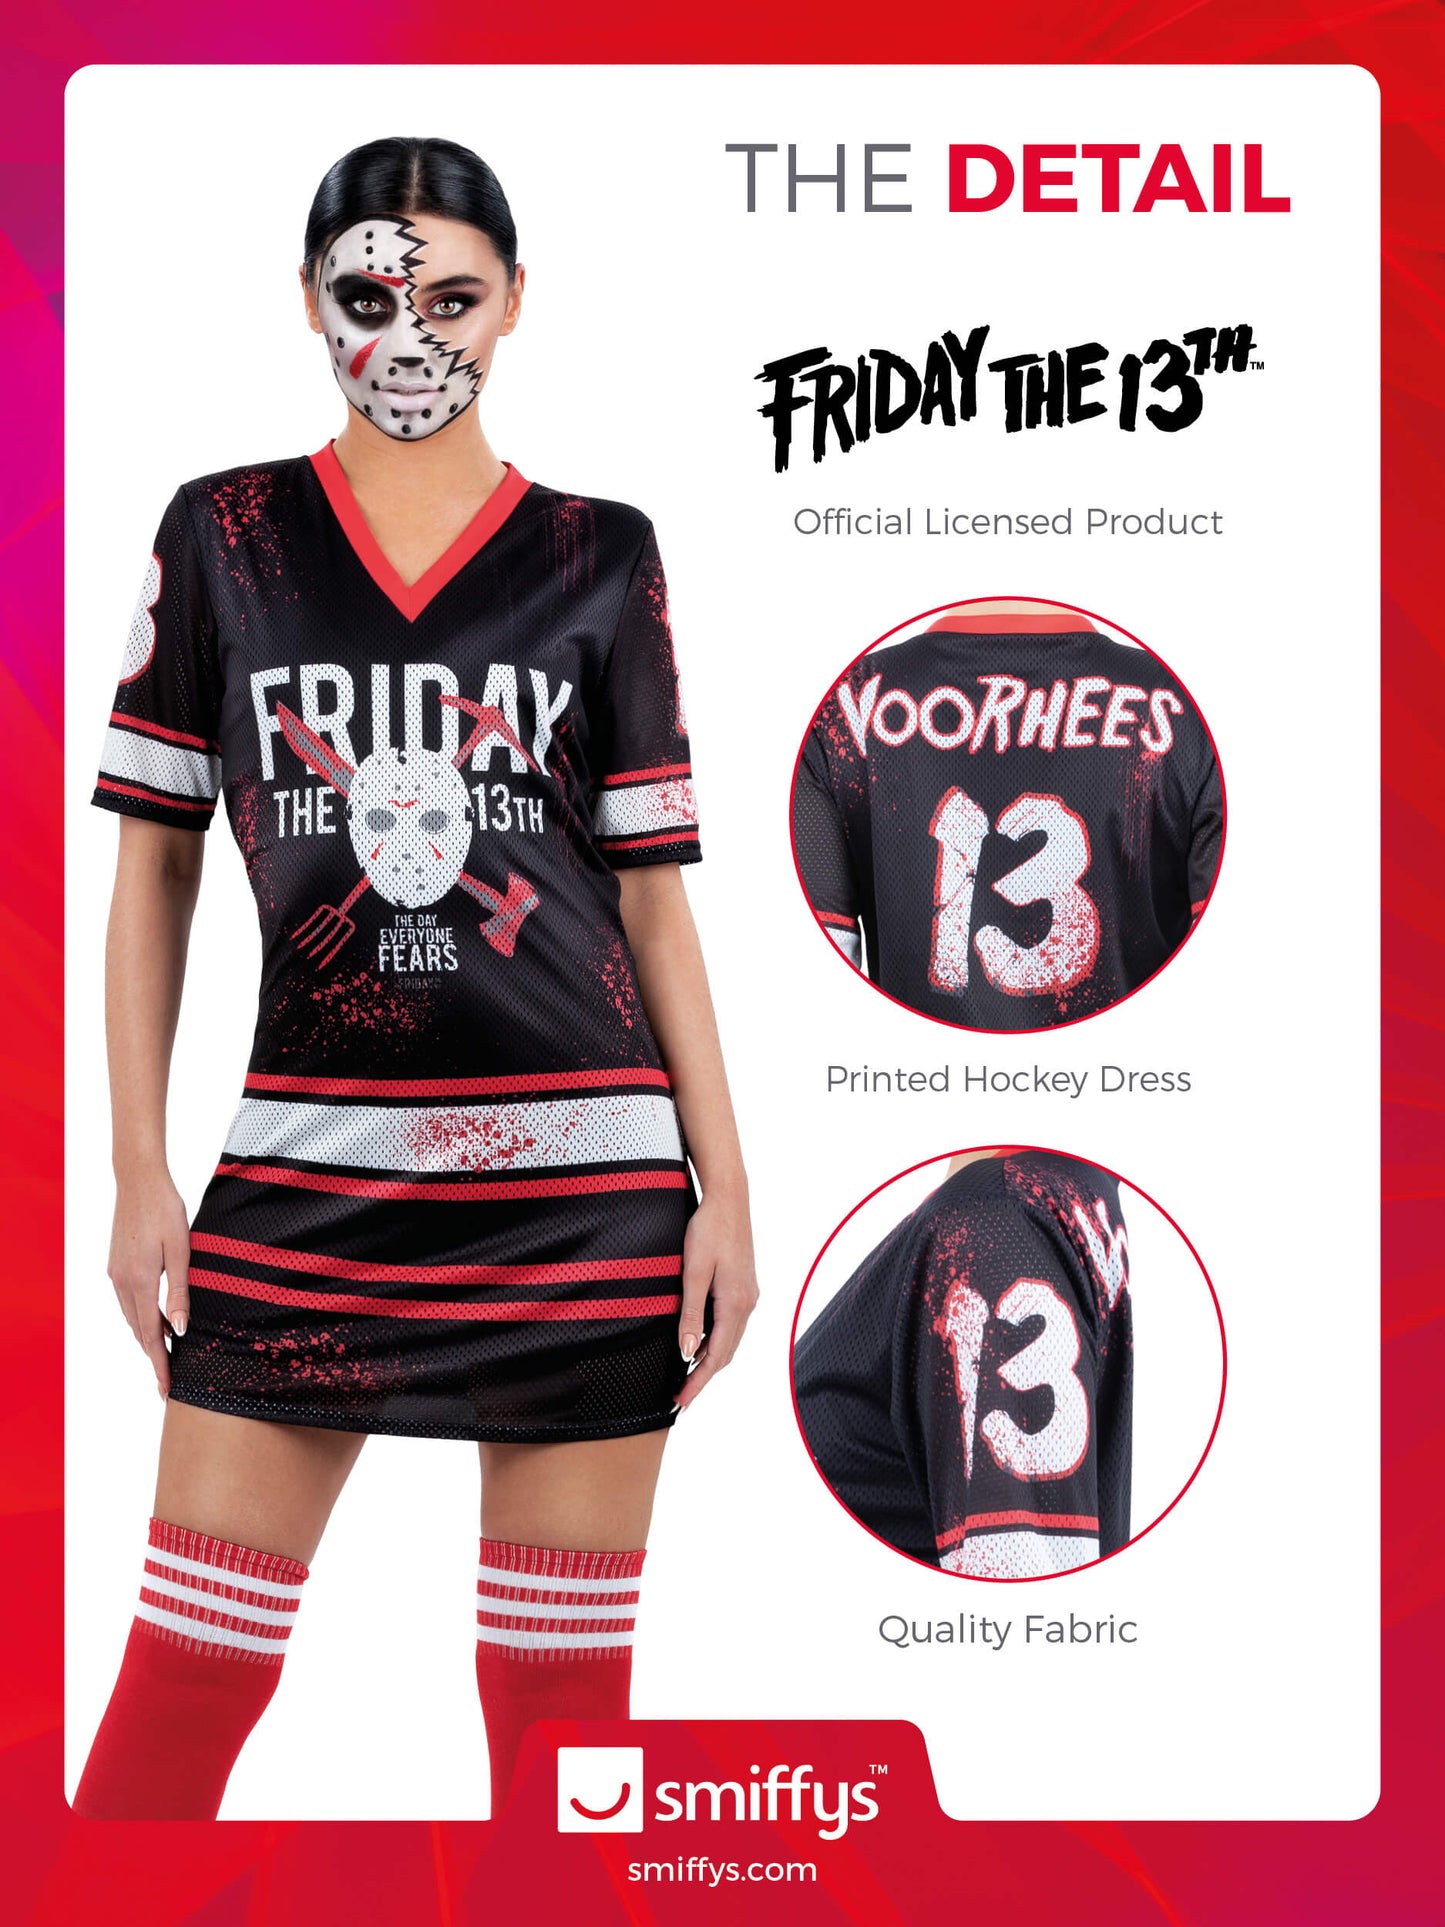 Friday the 13th, Ladies Costume